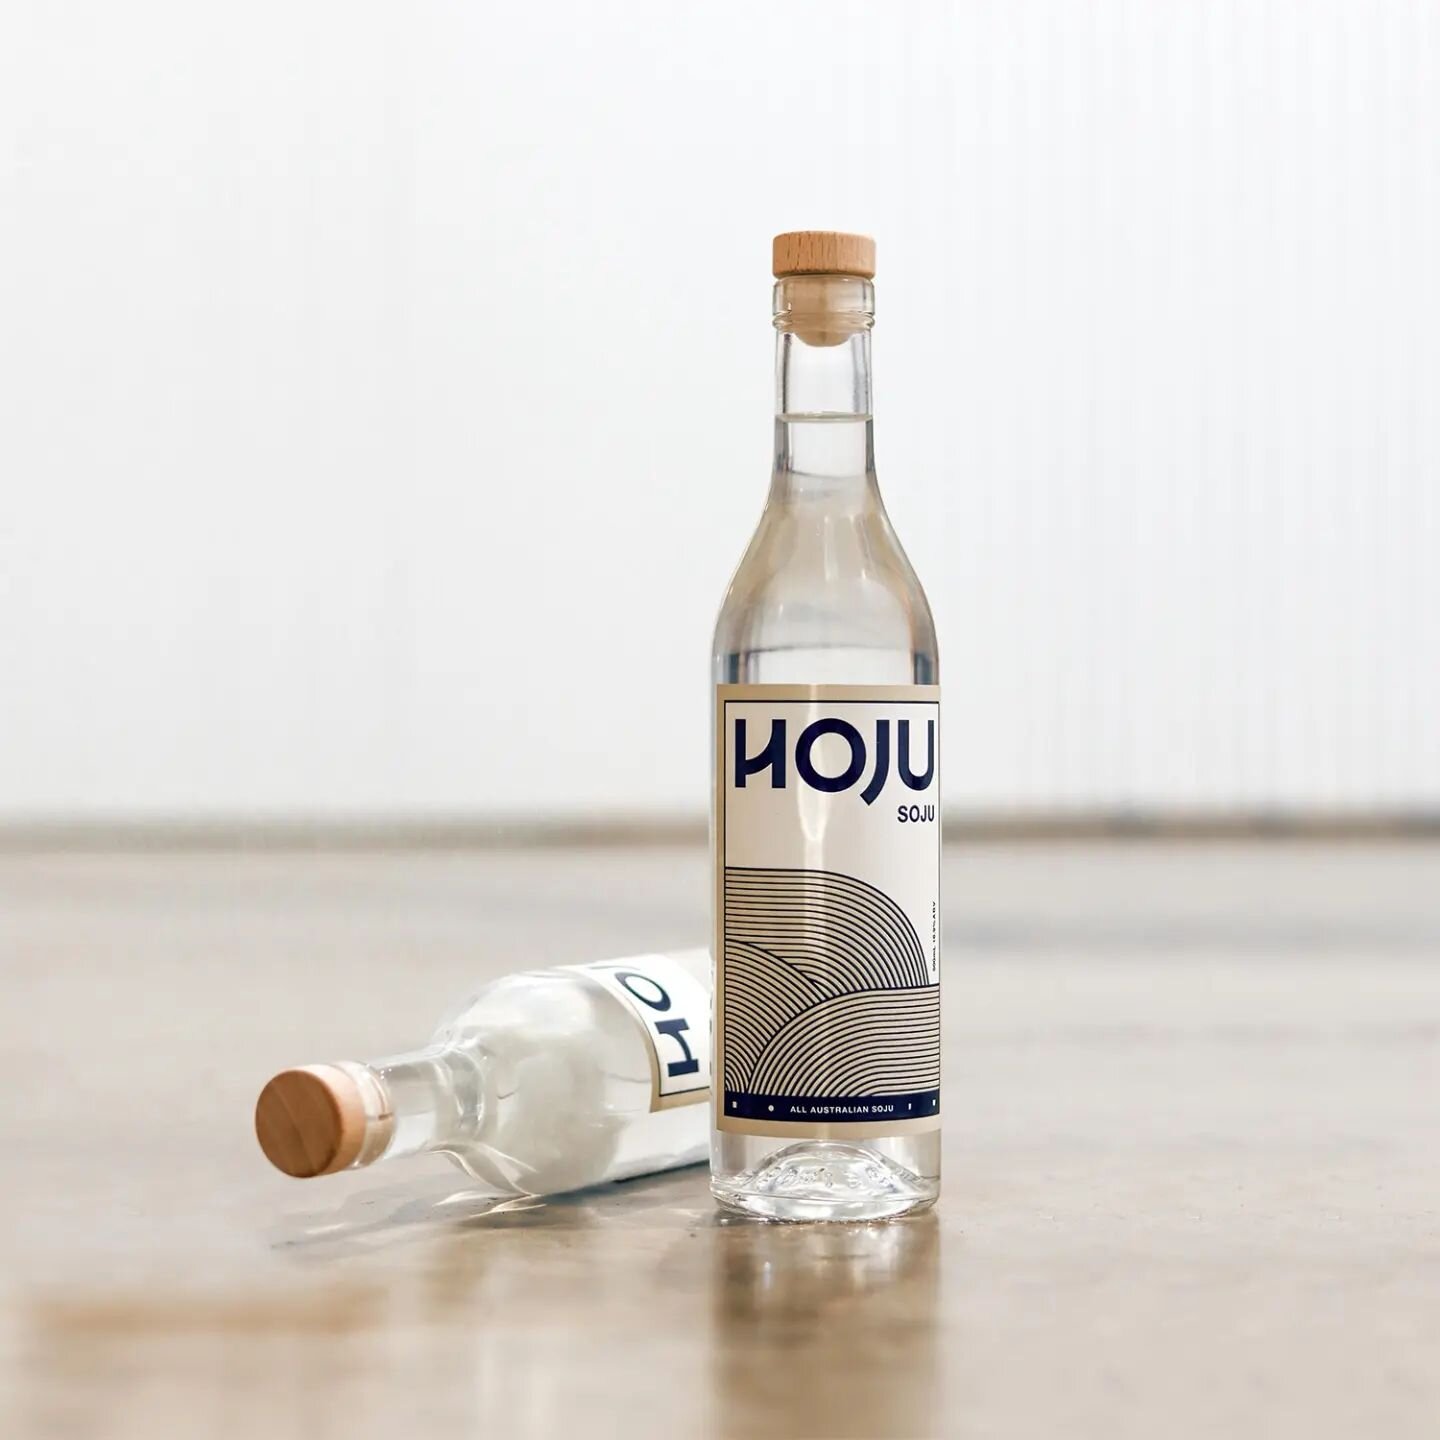 We never know exactly what awaits when a new project comes to our door, but we knew it would be special when we first met the boys from @_hojusoju.

From brand strategy and development to packaging and digital design, this multifaceted project requir